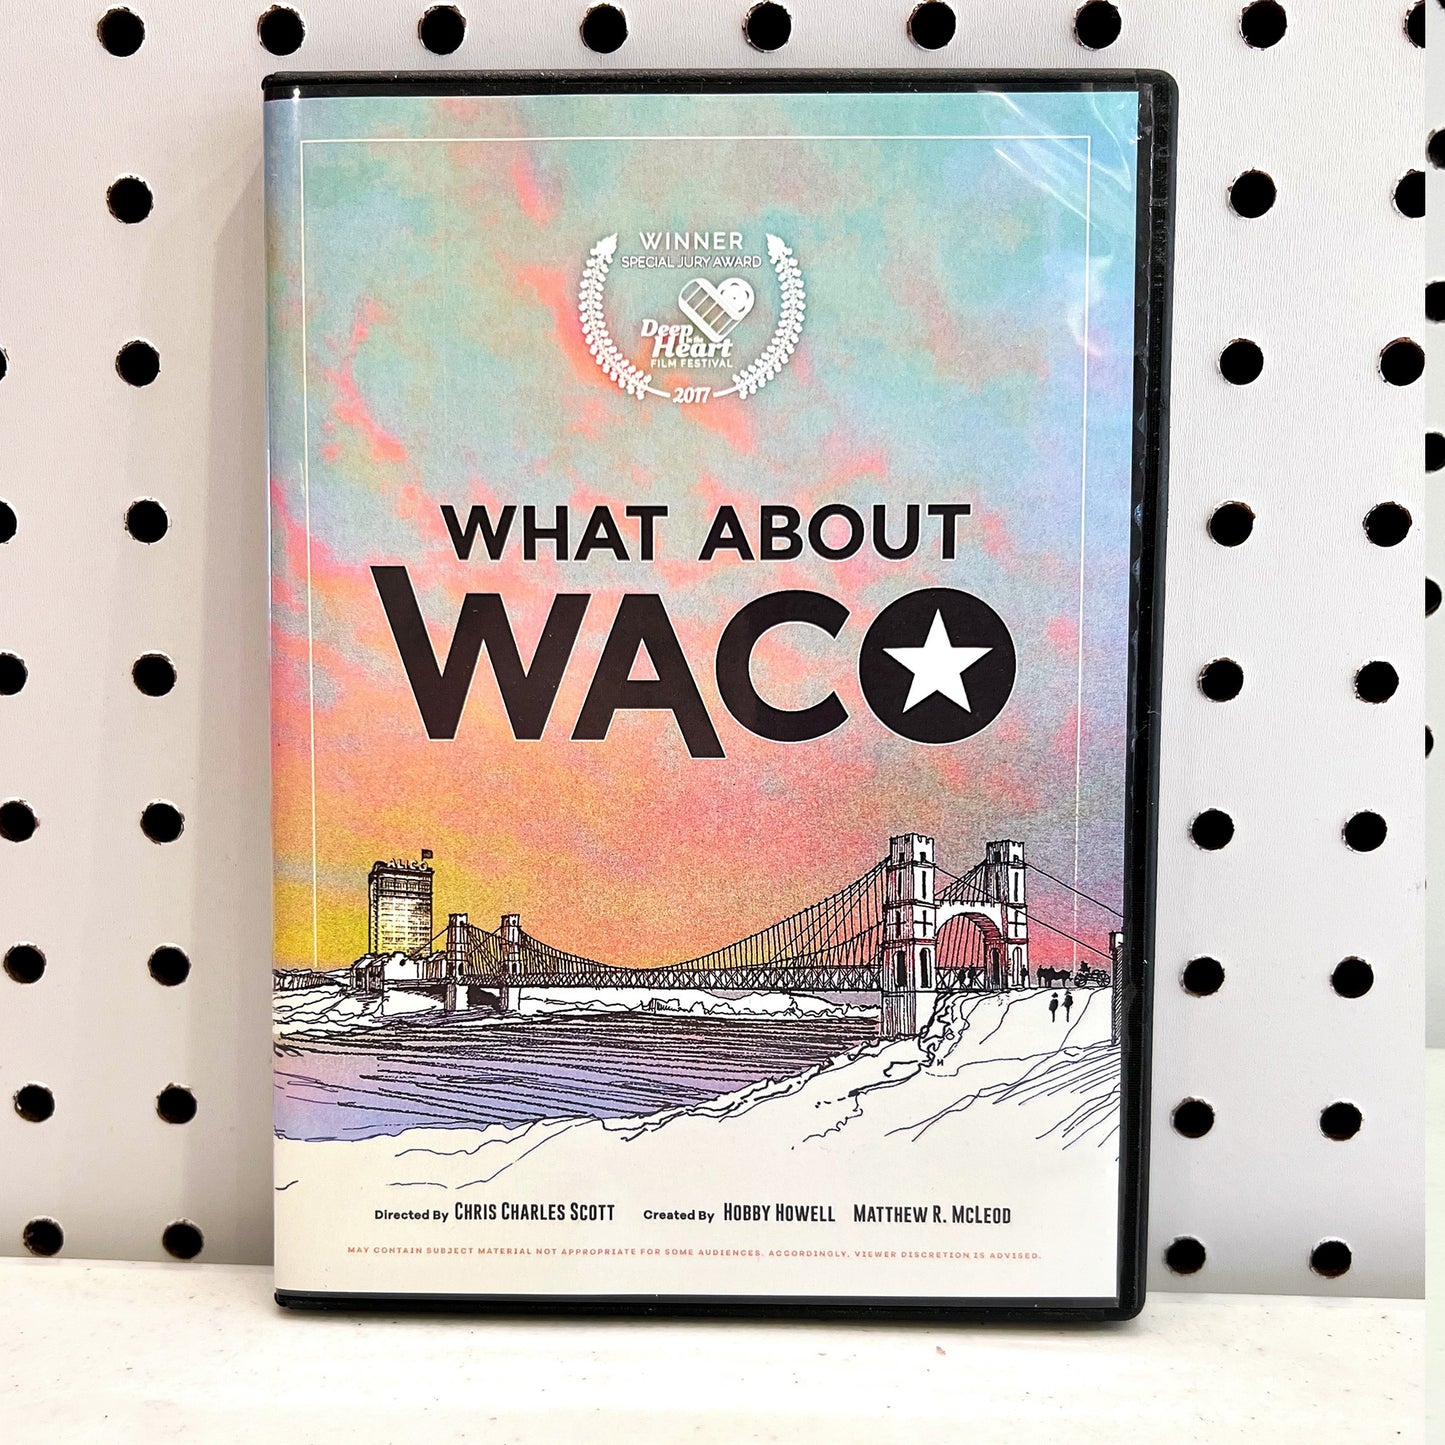 "What About Waco" DVD